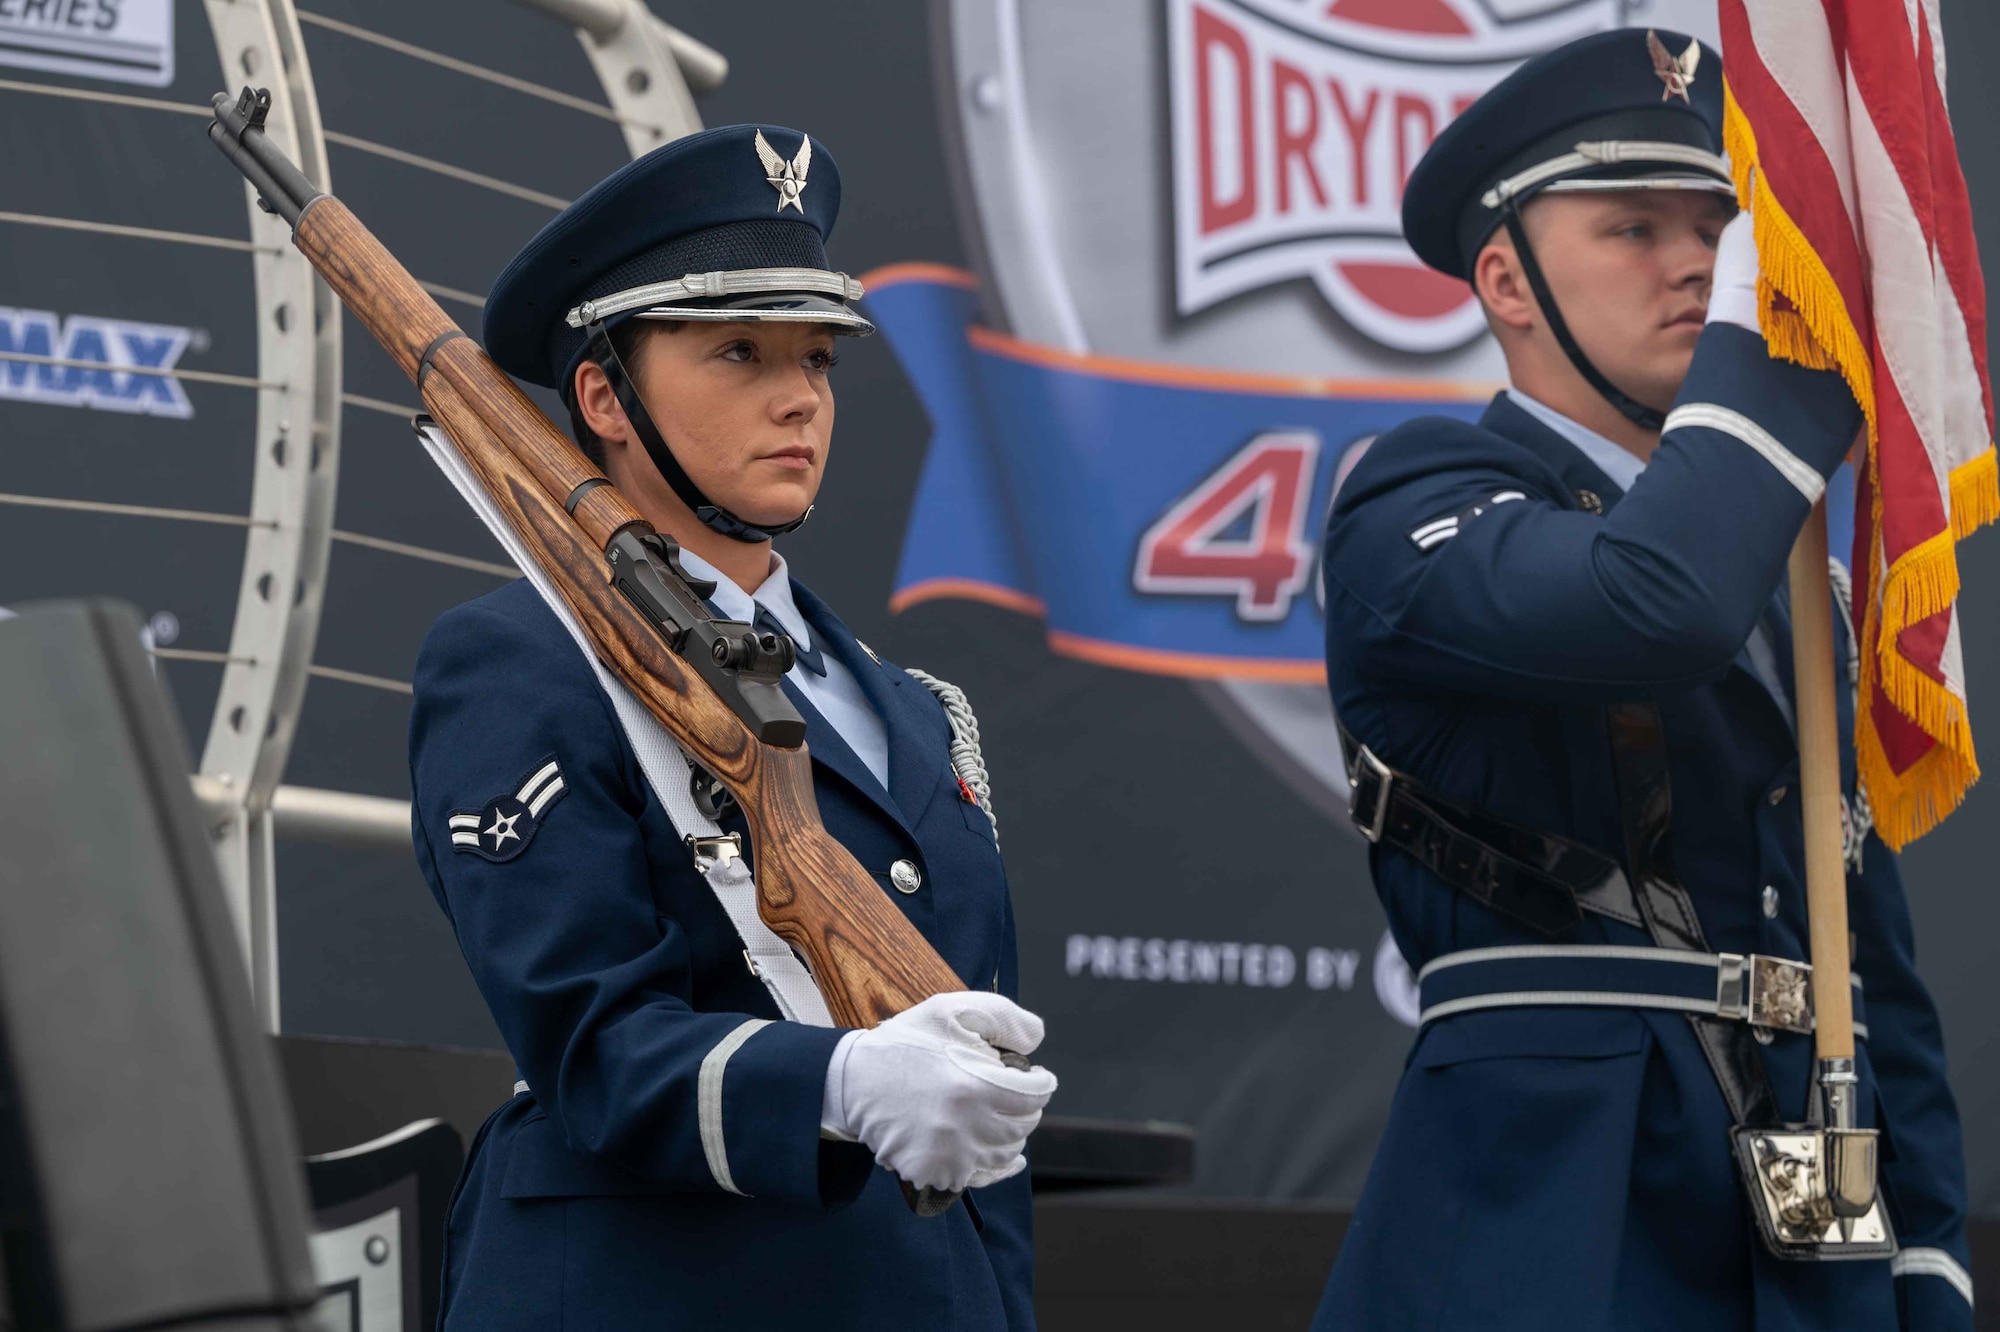 From the left, Airman 1st Class Laci Churchill, and Airman 1st Class Noah Preisch, both Dover Air Force Base Honor Guard members, present the colors before the Drydene 400 at Dover Motor Speedway in Dover, Delaware, May 1, 2022. Honor Guard members presented the colors during pre-race events throughout the 2022 NASCAR weekend. (U.S. Air Force photo by Senior Airman Faith Schaefer)